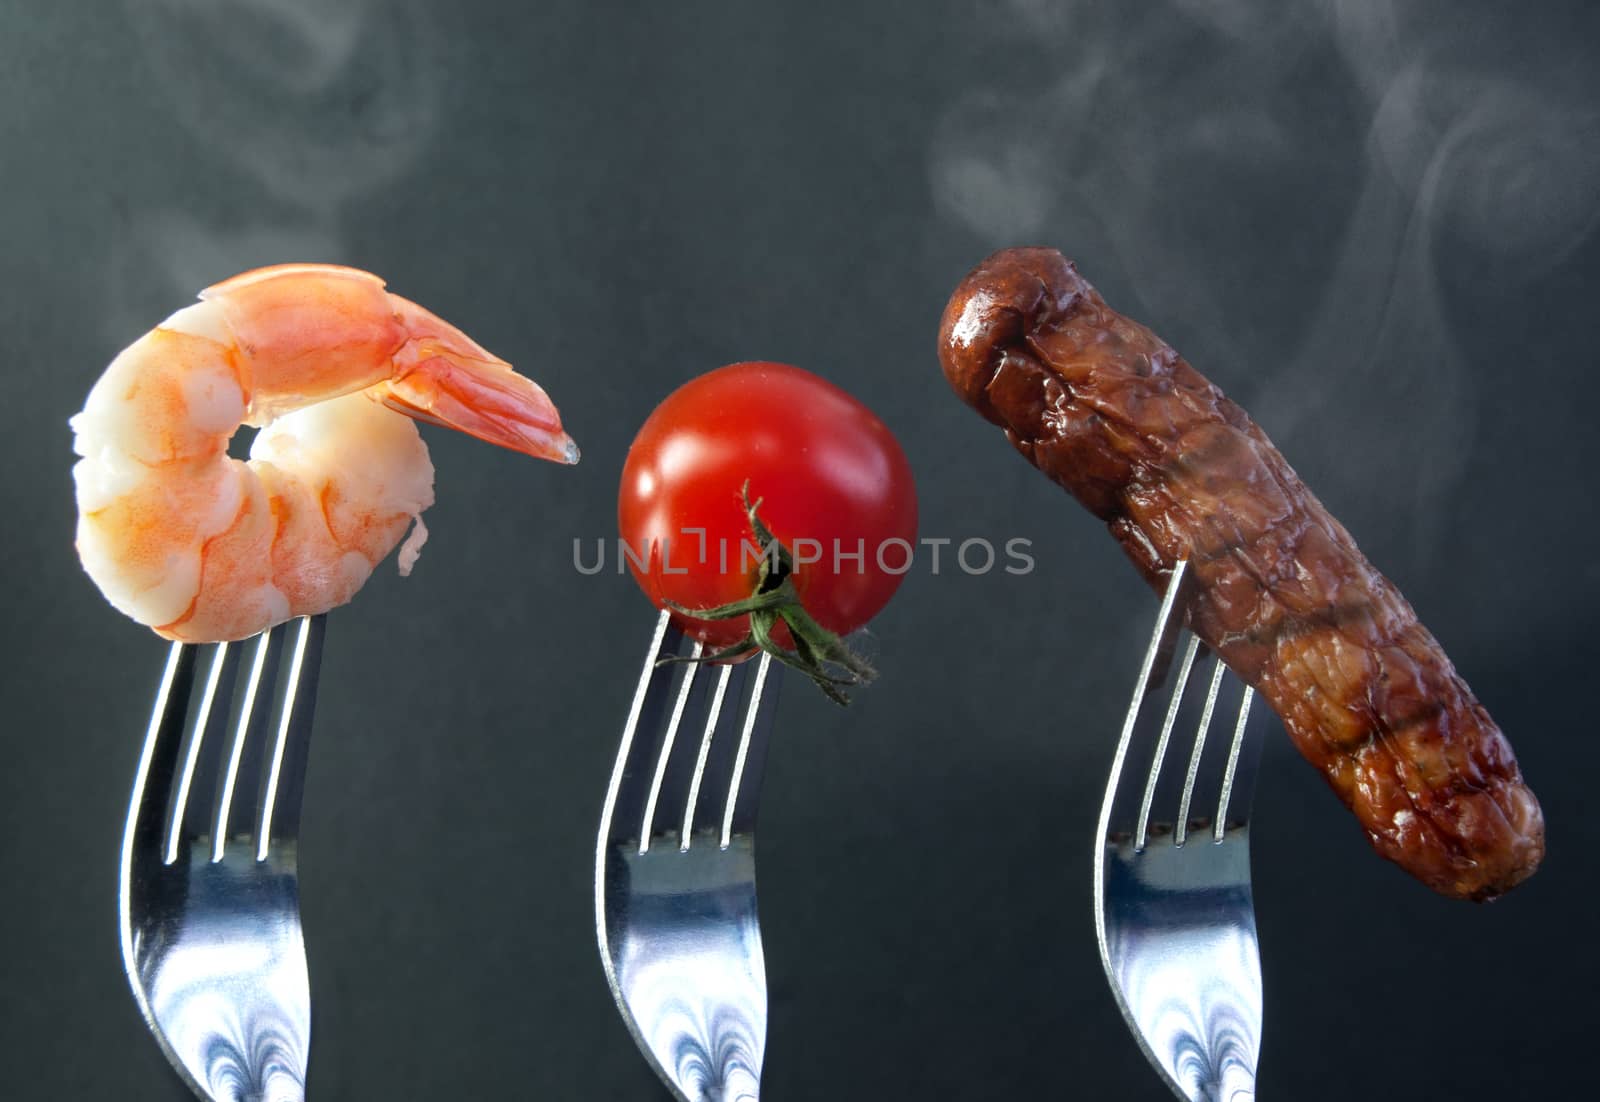 Barbecue ingredients including shrimp, tomato and sausage on forks